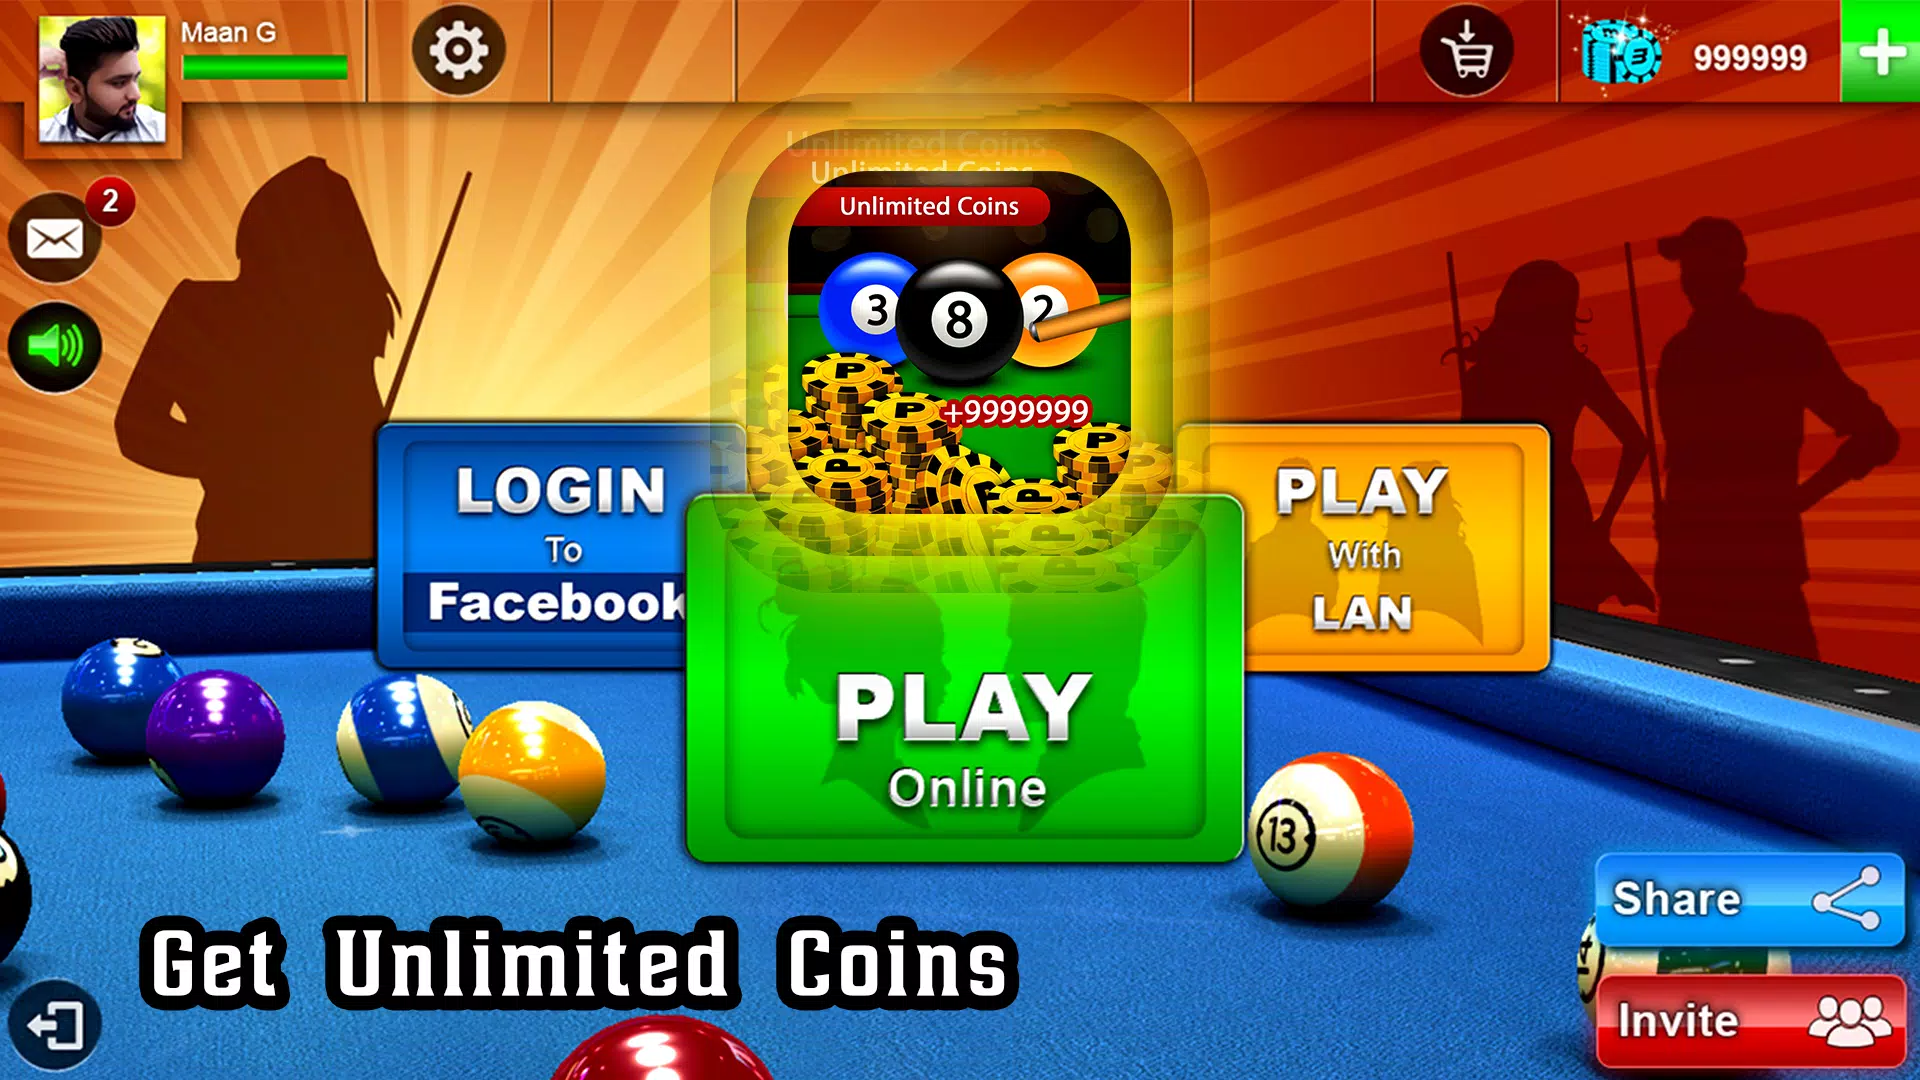 8 Ball Pool Unlimited Coins And Cash Mod Apk Hack Latest Version 5.13.0